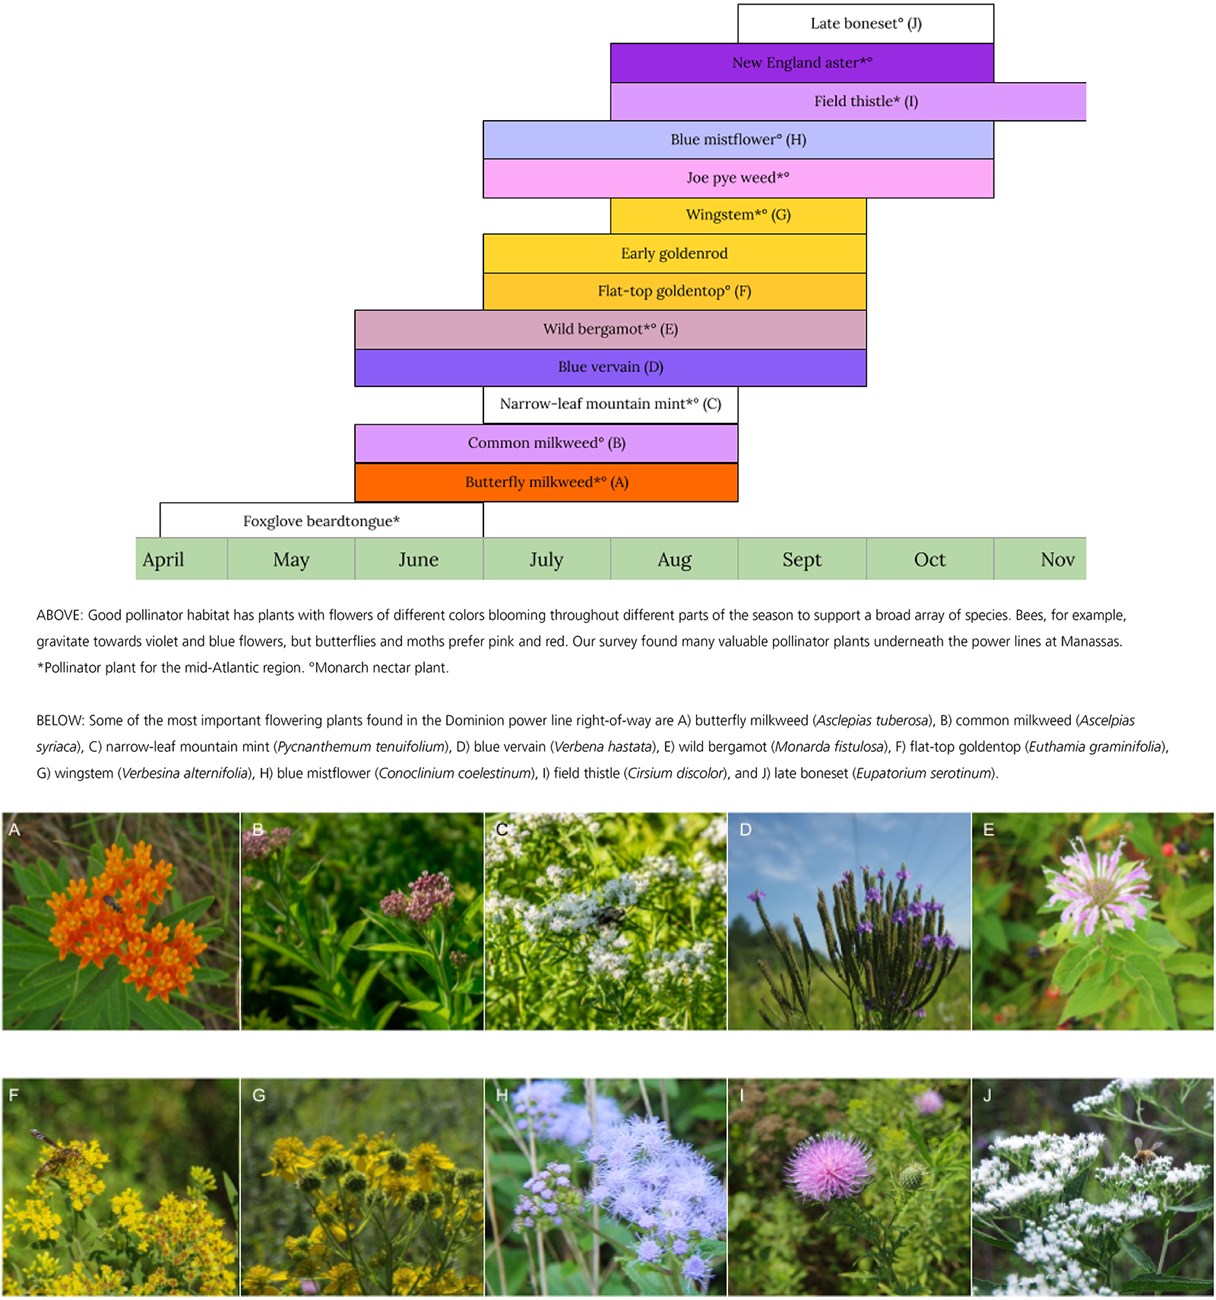 Graphic showing when different flowering plants bloom in the grasslands